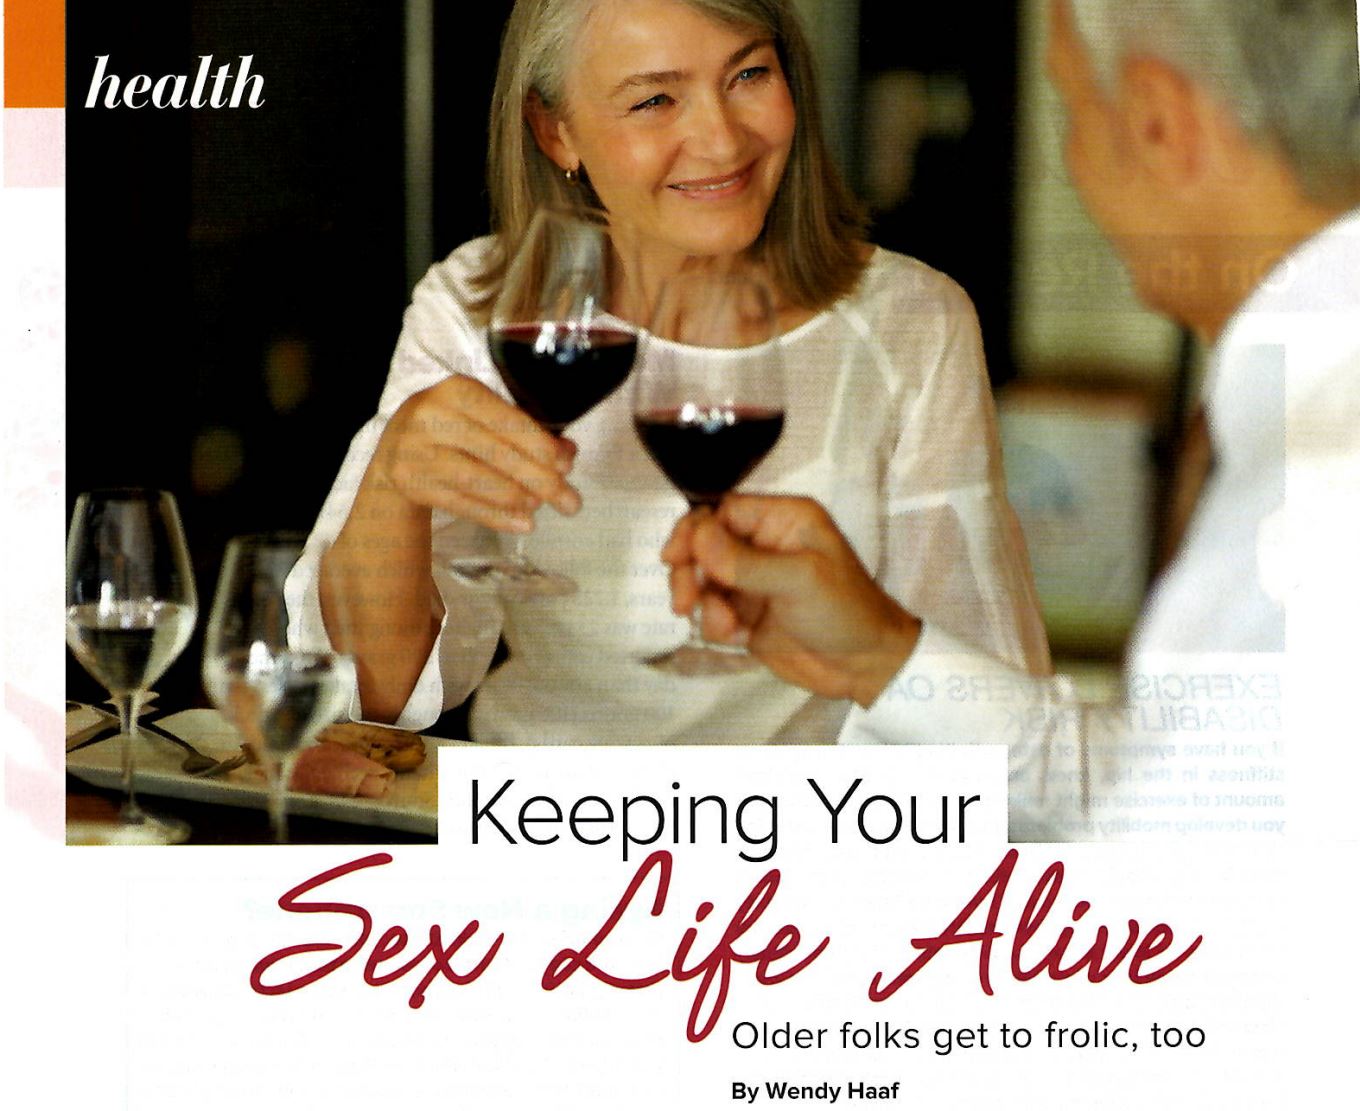 Keeping Your Sex Life Alive: Good Times Magazine